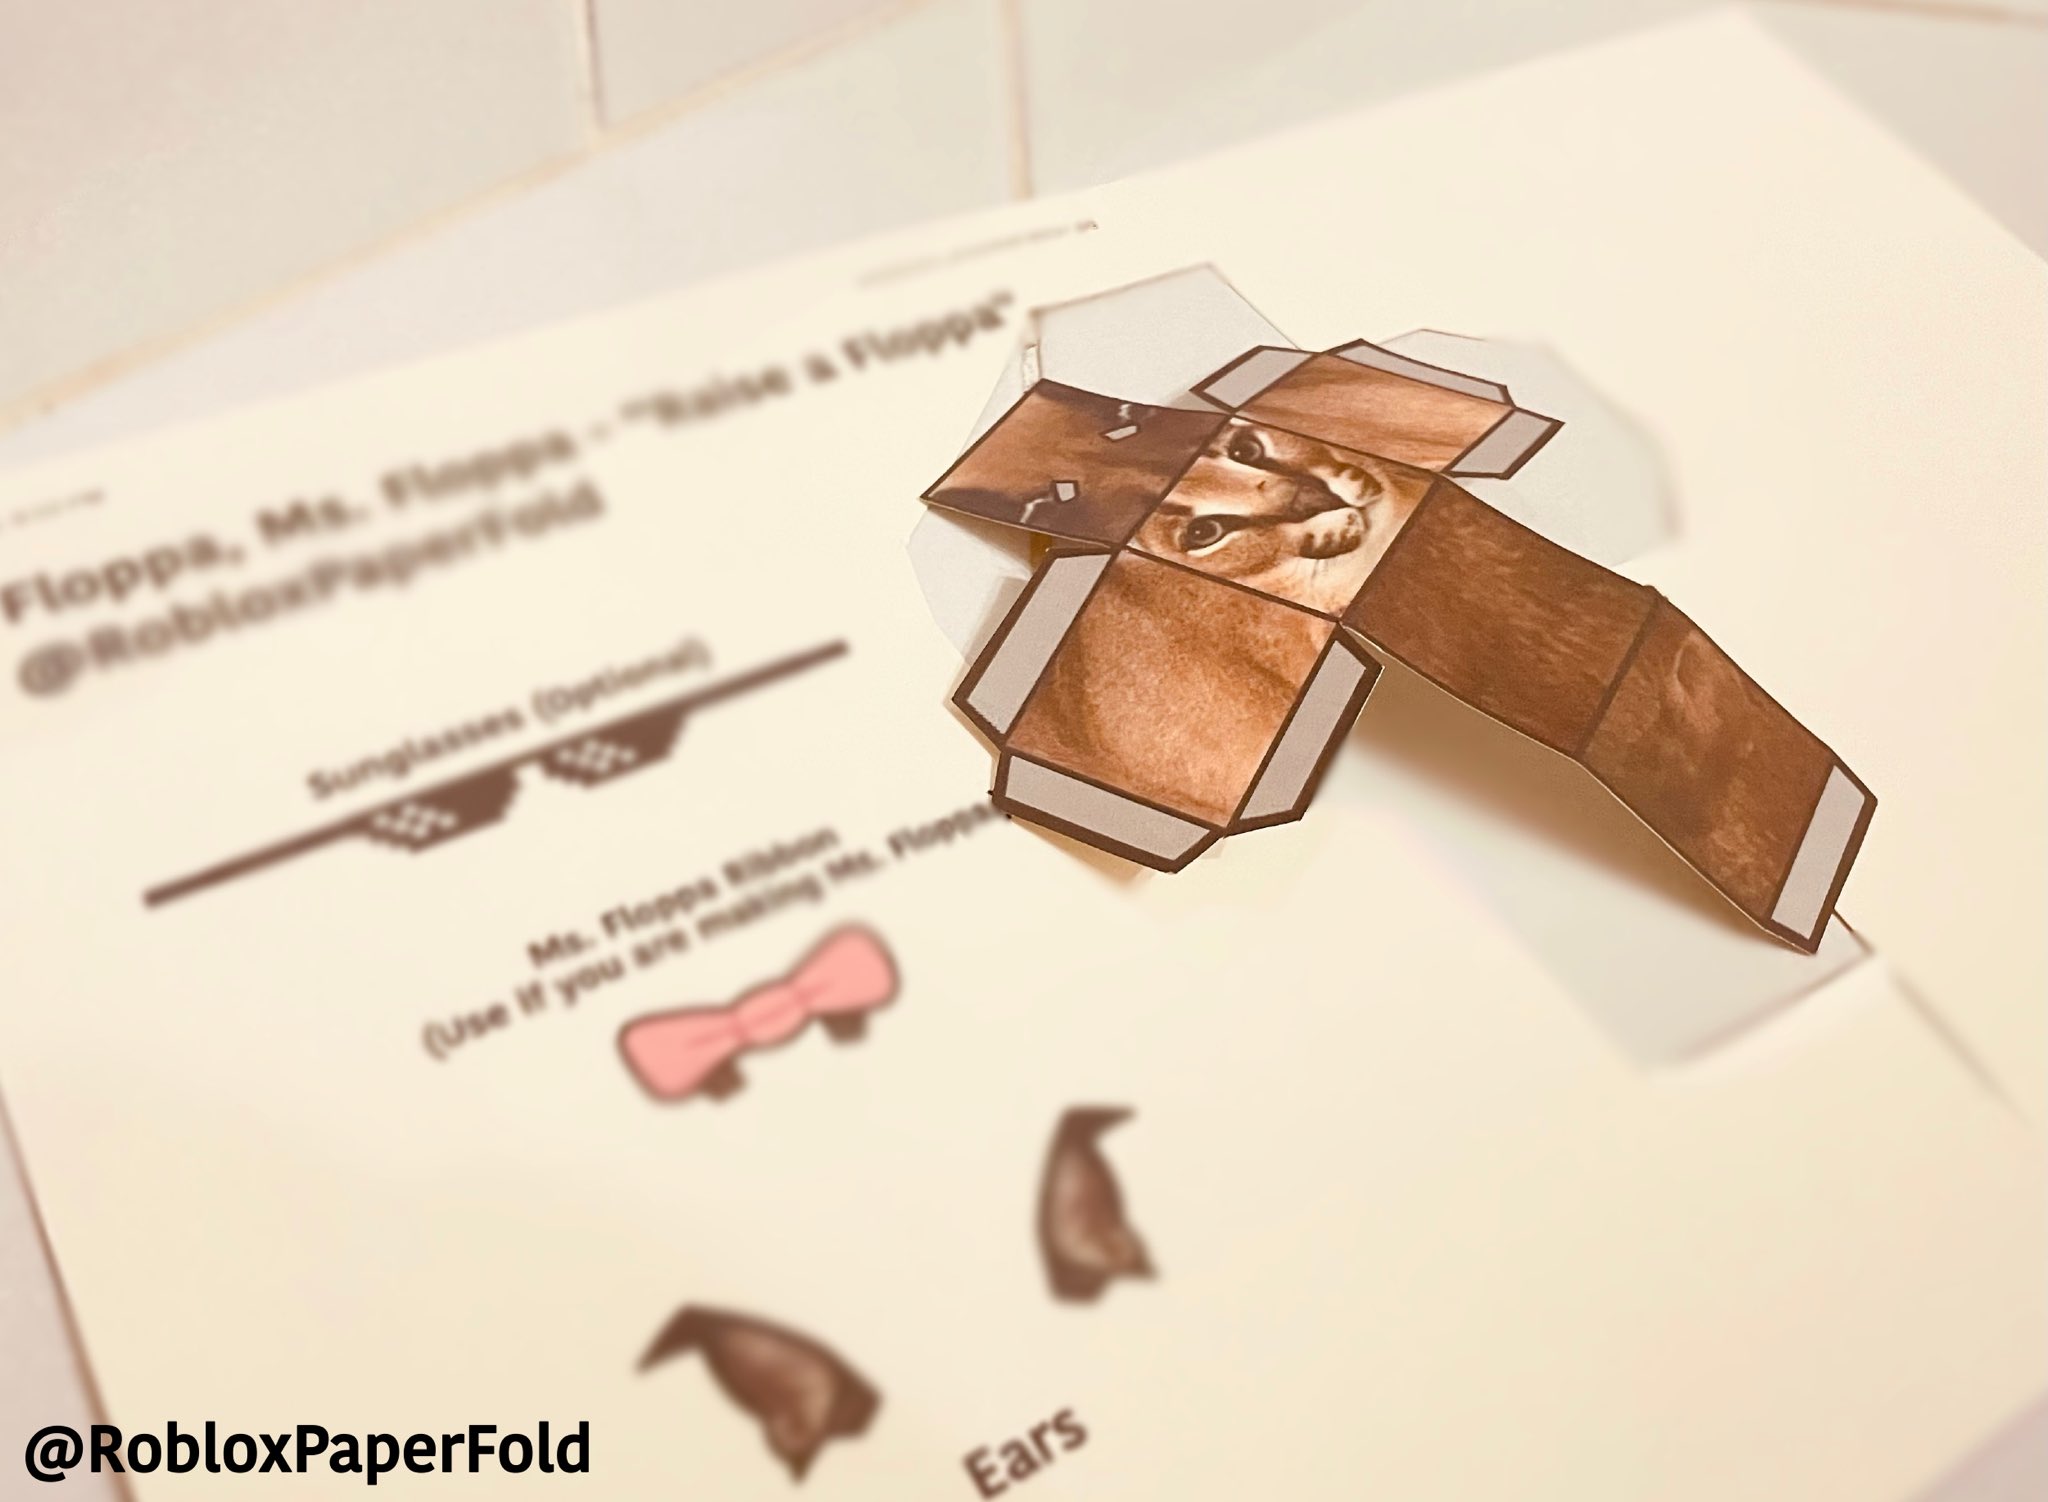 RobloxPaperFolds (Closed for now 10/10) on X: Floppa from “Raise a Floppa!”  #Roblox #papercraft  / X